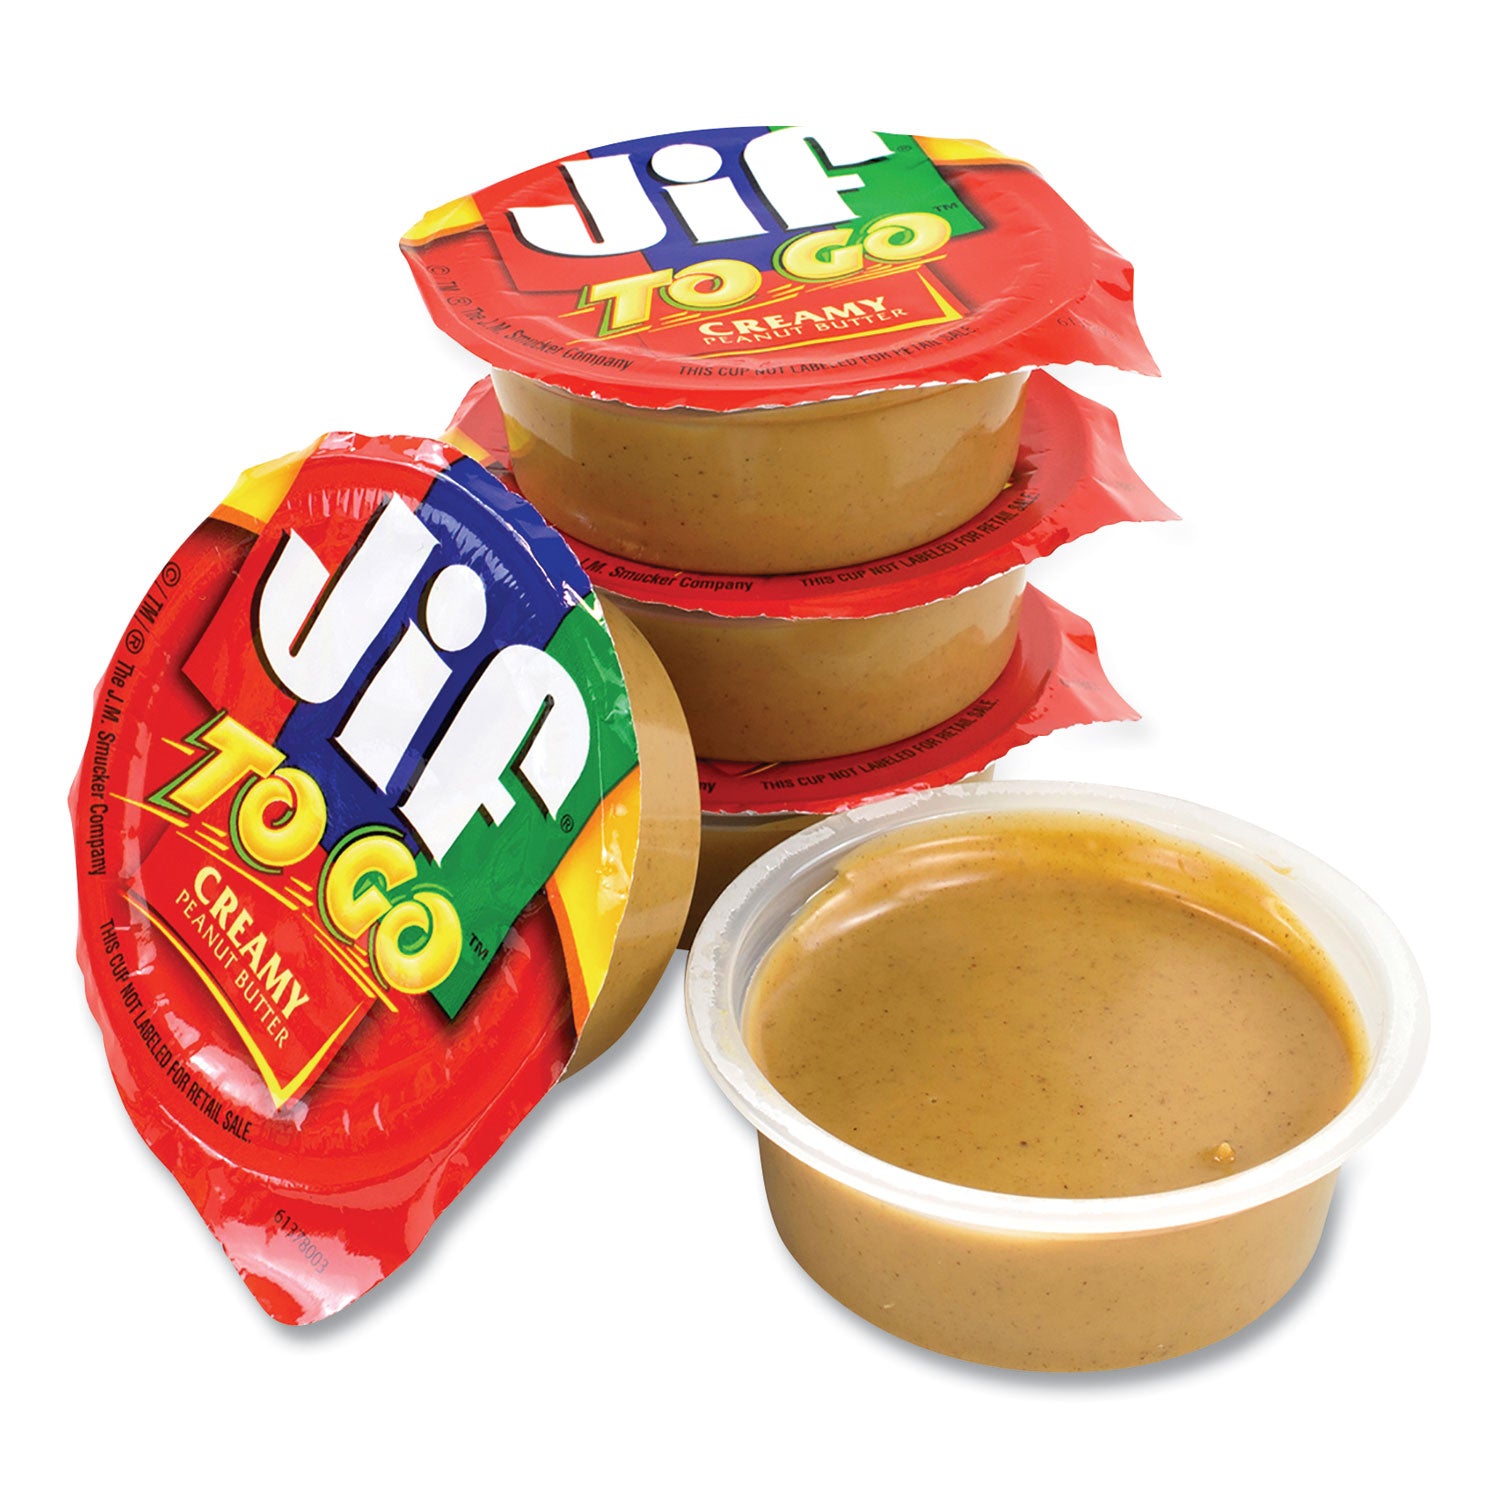 spreads-creamy-peanut-butter-15-oz-cup-36-cups-box-ships-in-1-3-business-days_grr22000535 - 1